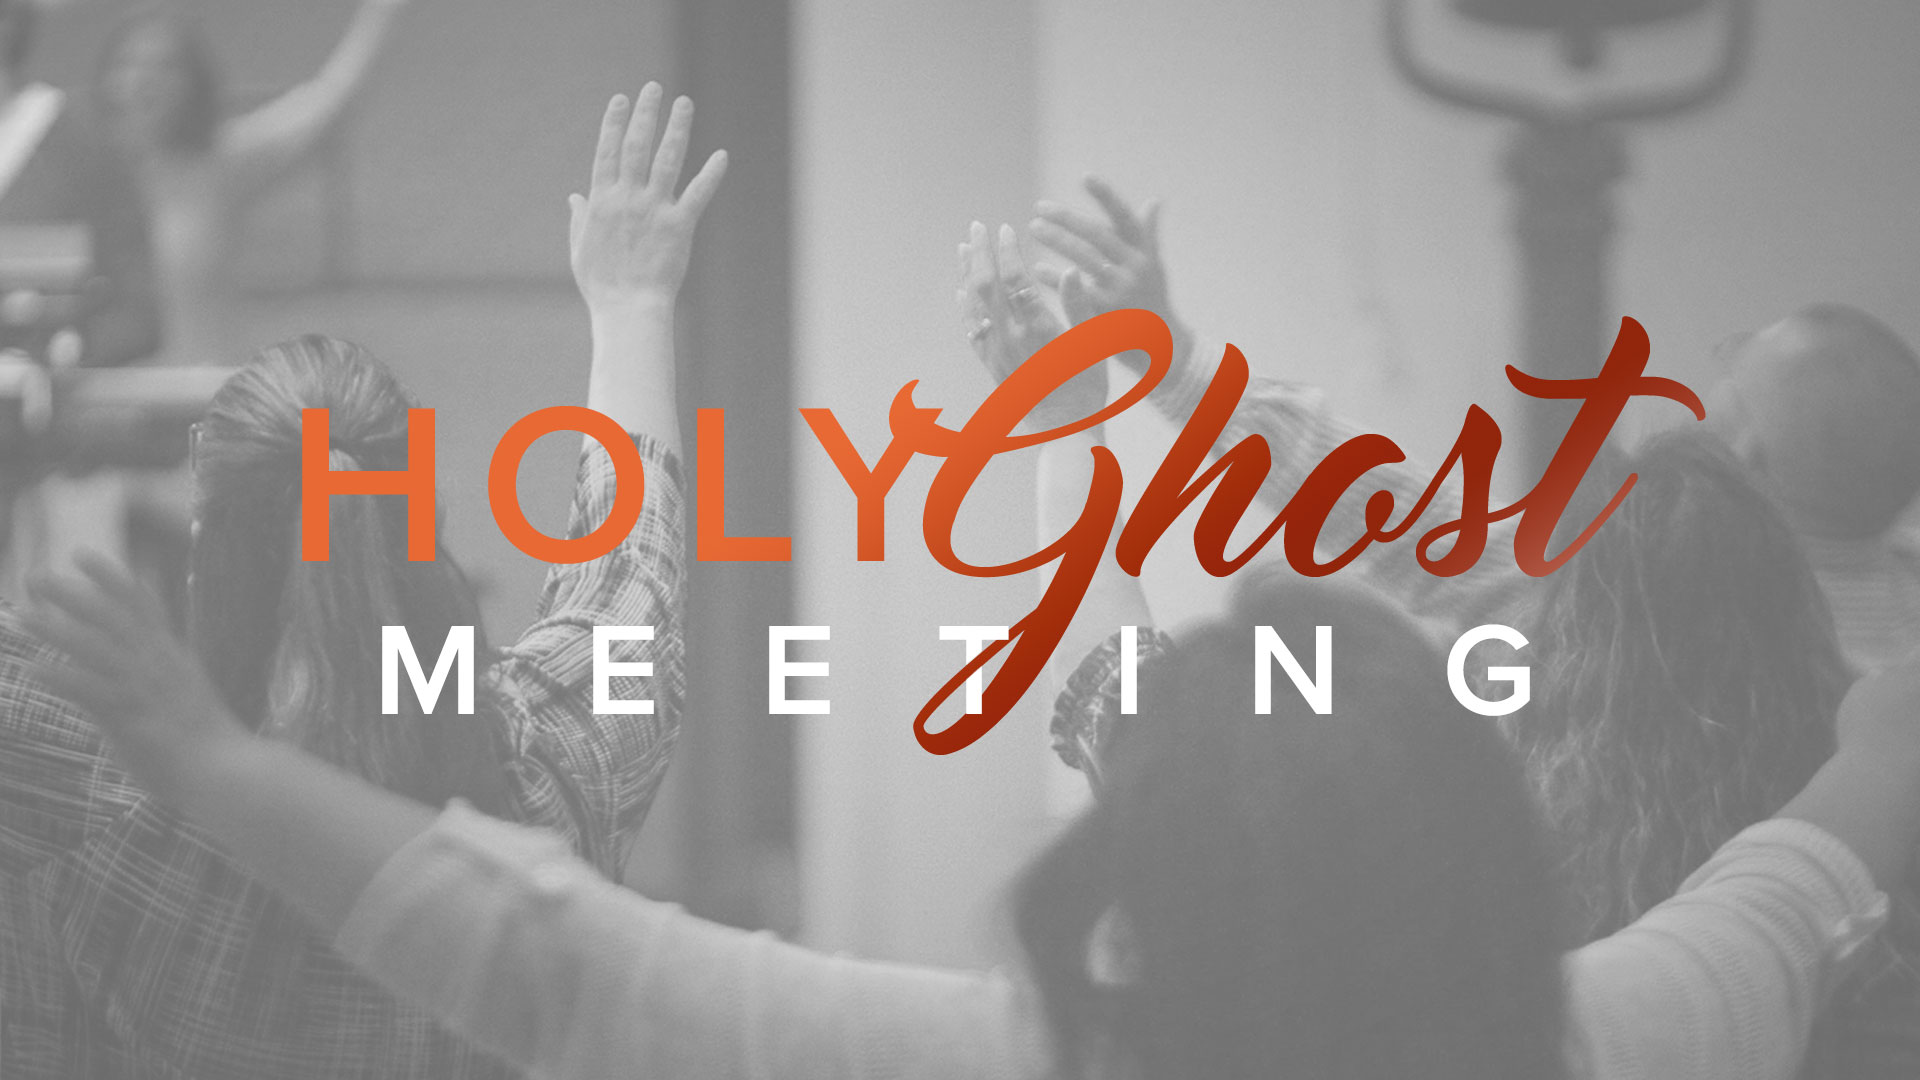 Holy Ghost Meeting